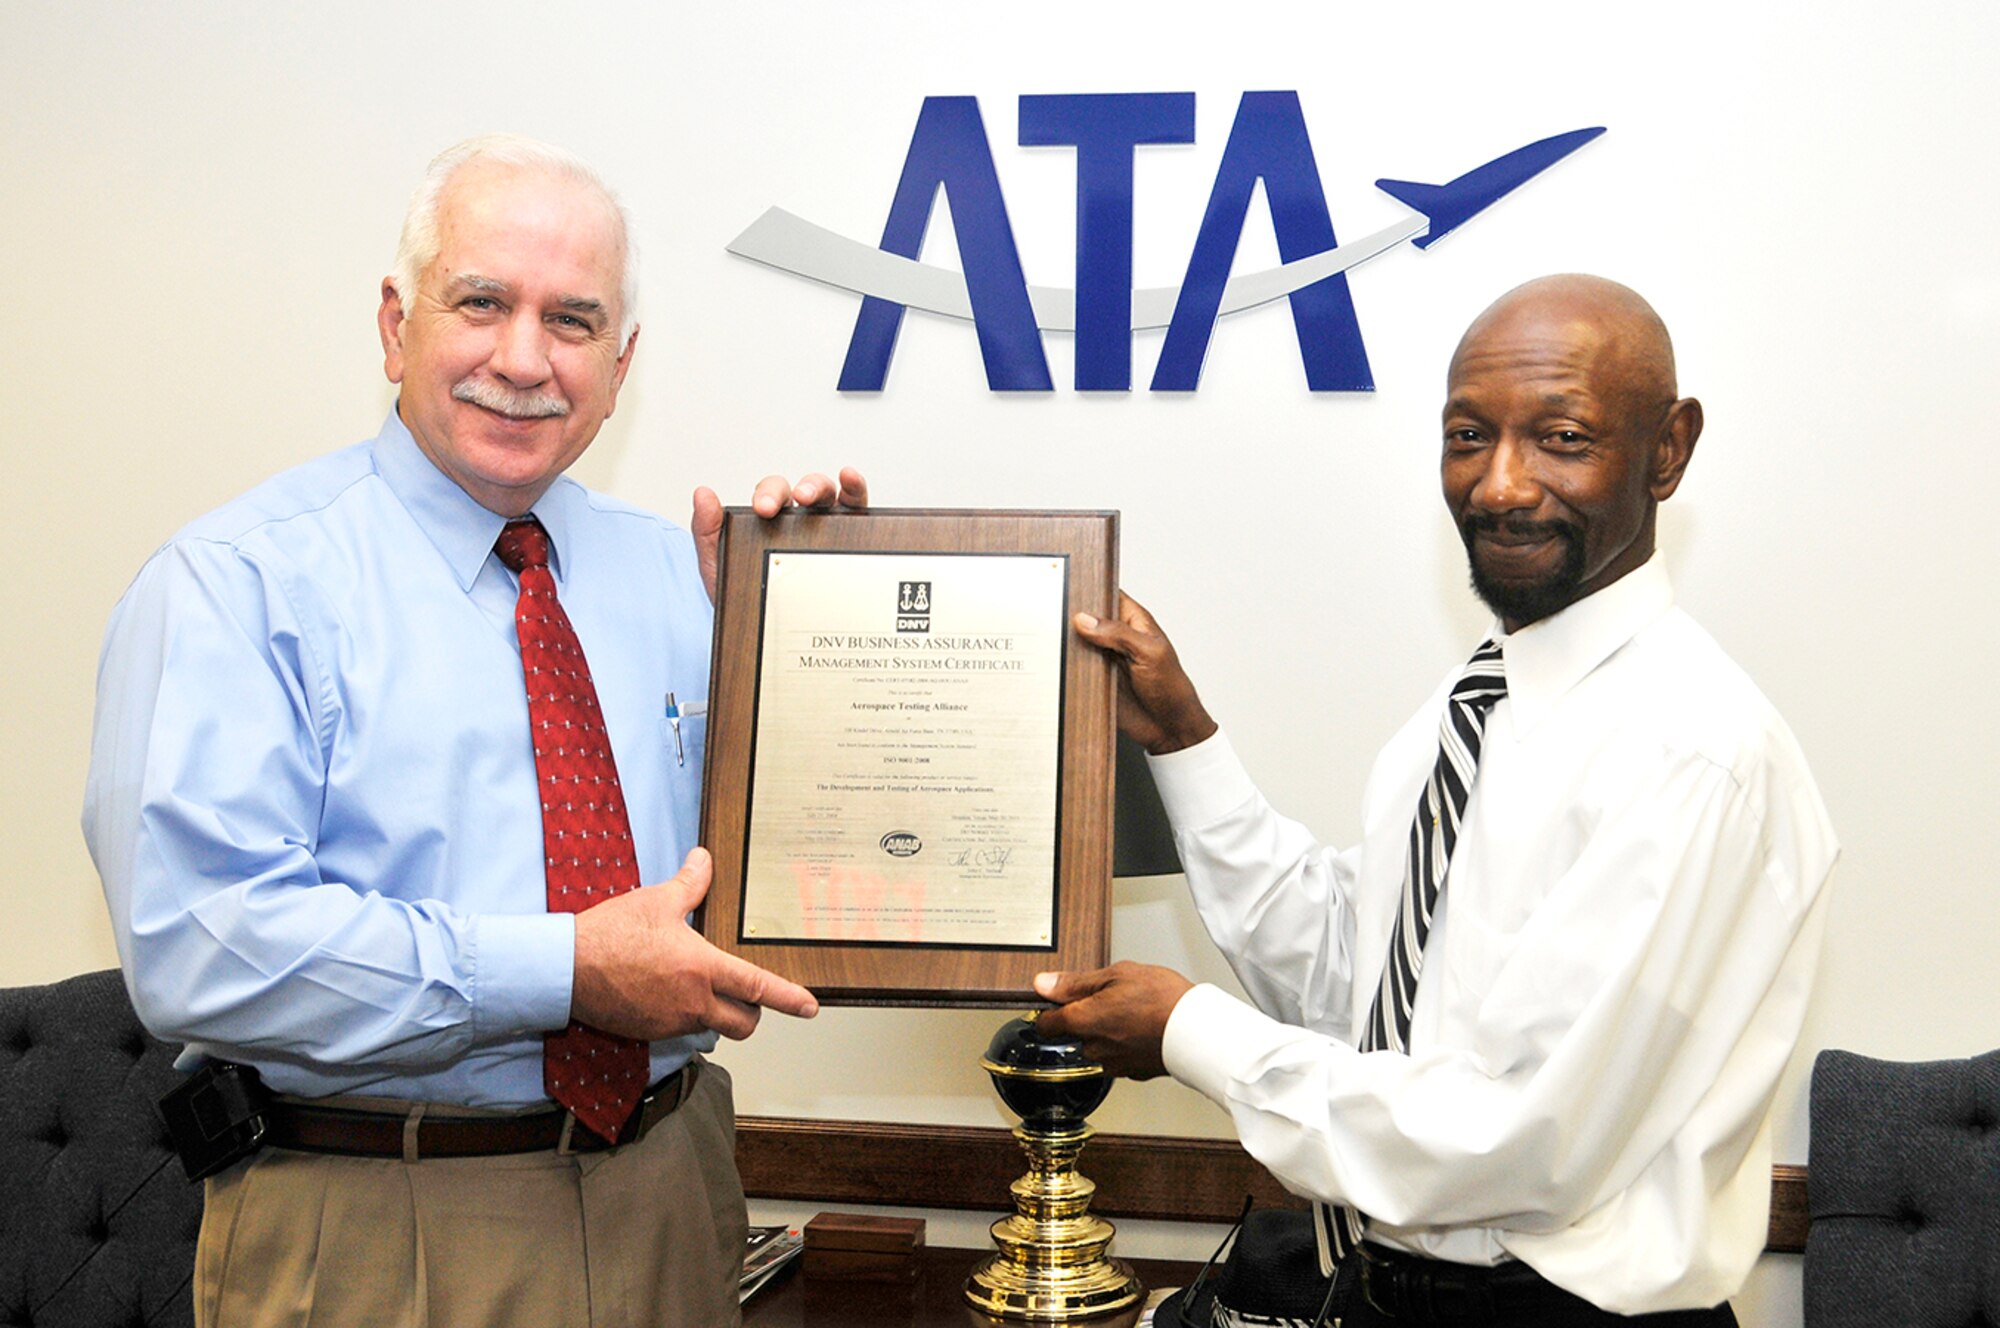 Aerospace Testing Alliance (ATA) General Manager Steve Pearson and J.T. Northcutt, an ATA quality manager and management system branch manager, display the recently received ISO 9001:2008 certificate plaque certifying that ATA has been found to conform to the Management System Standard. (Photo by Rick Goodfriend)